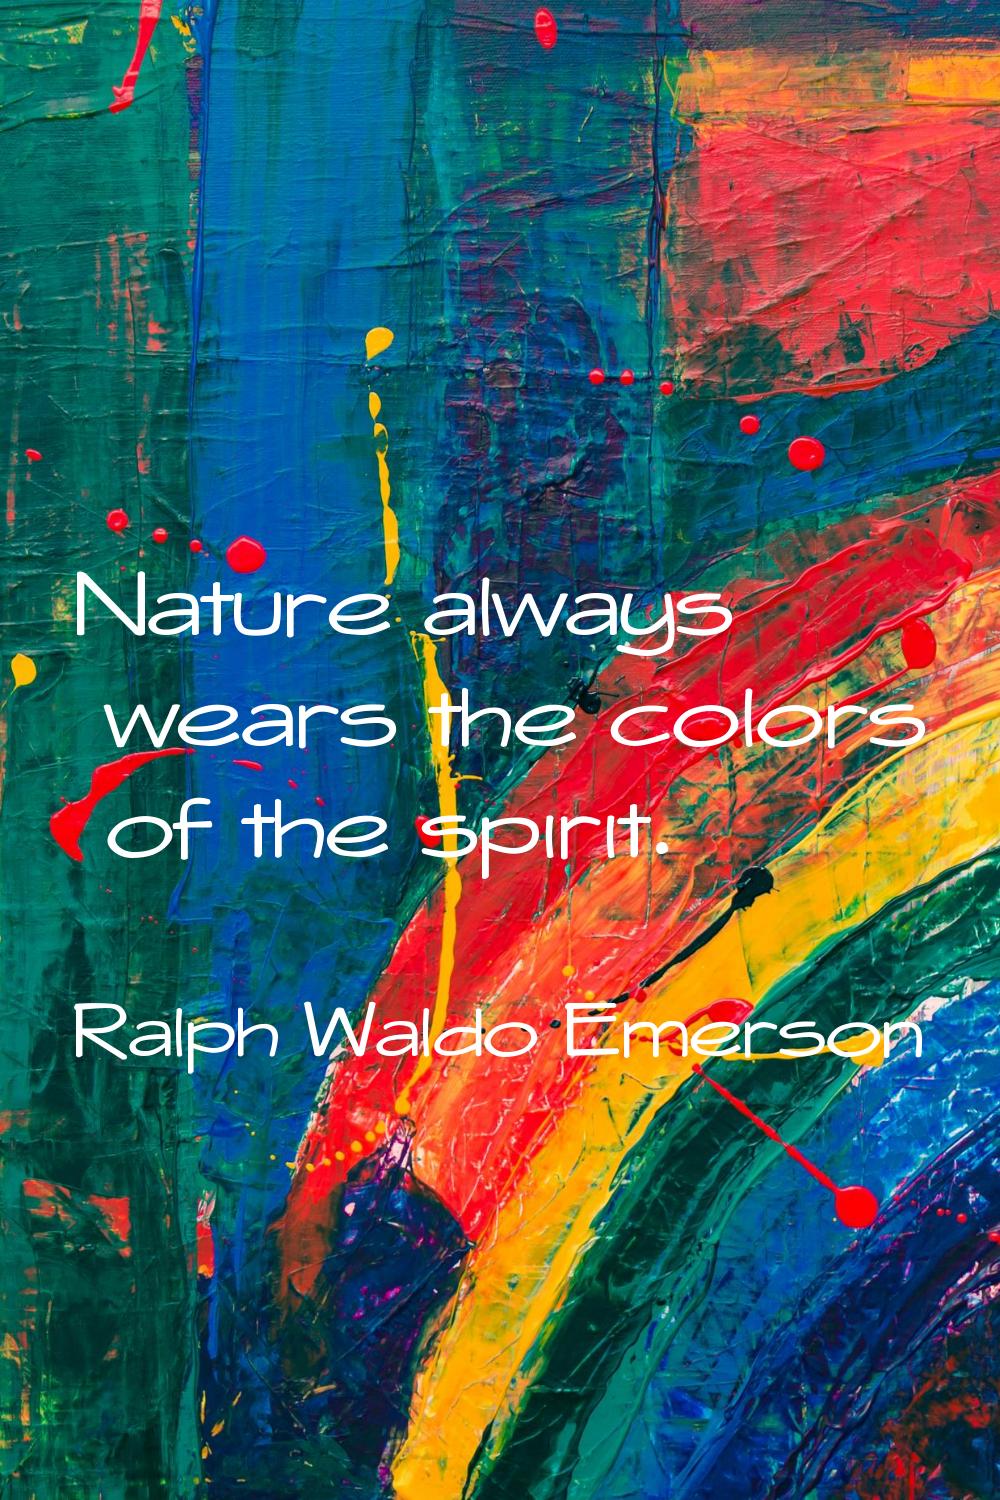 Nature always wears the colors of the spirit.